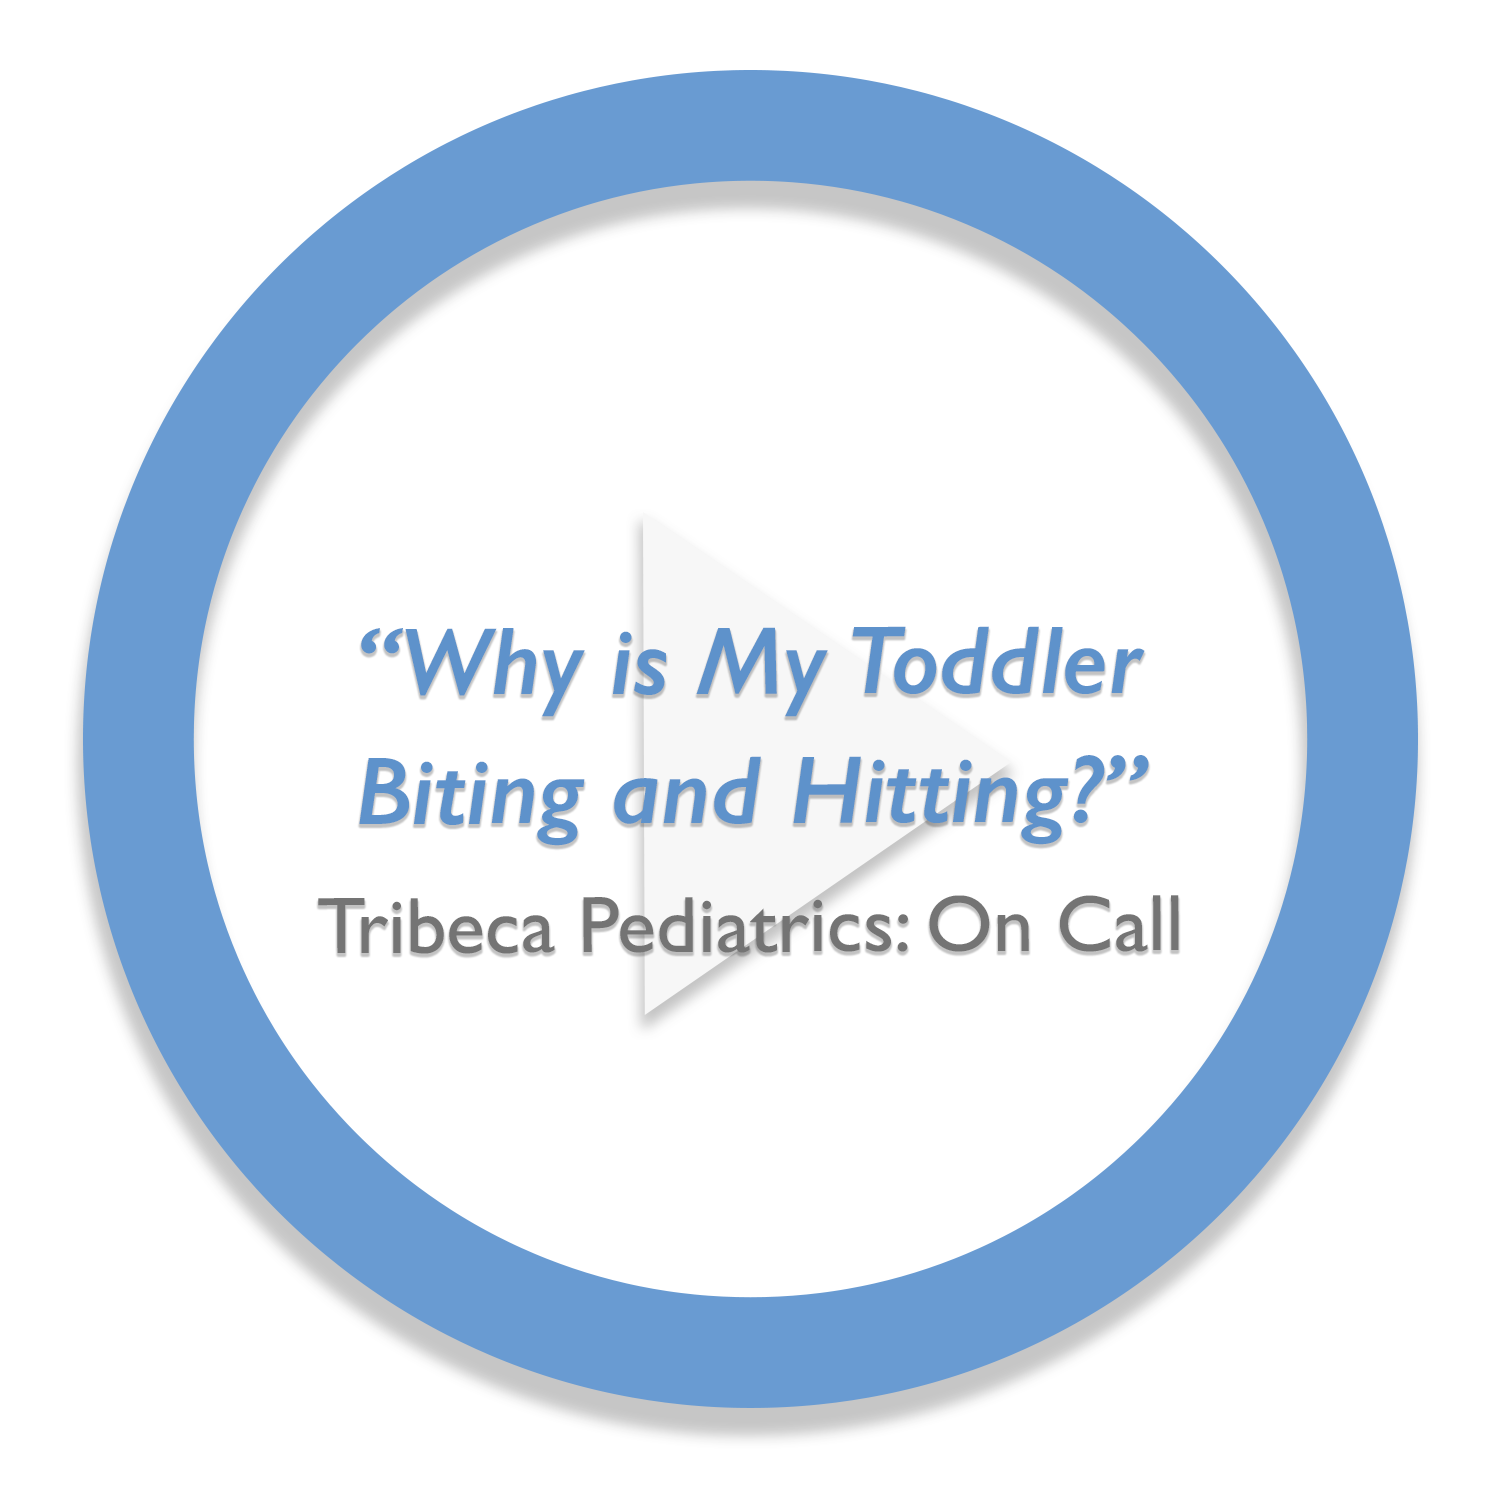 "Why is My Toddler Biting and Hitting?" Tribeca Pediatrics On Call